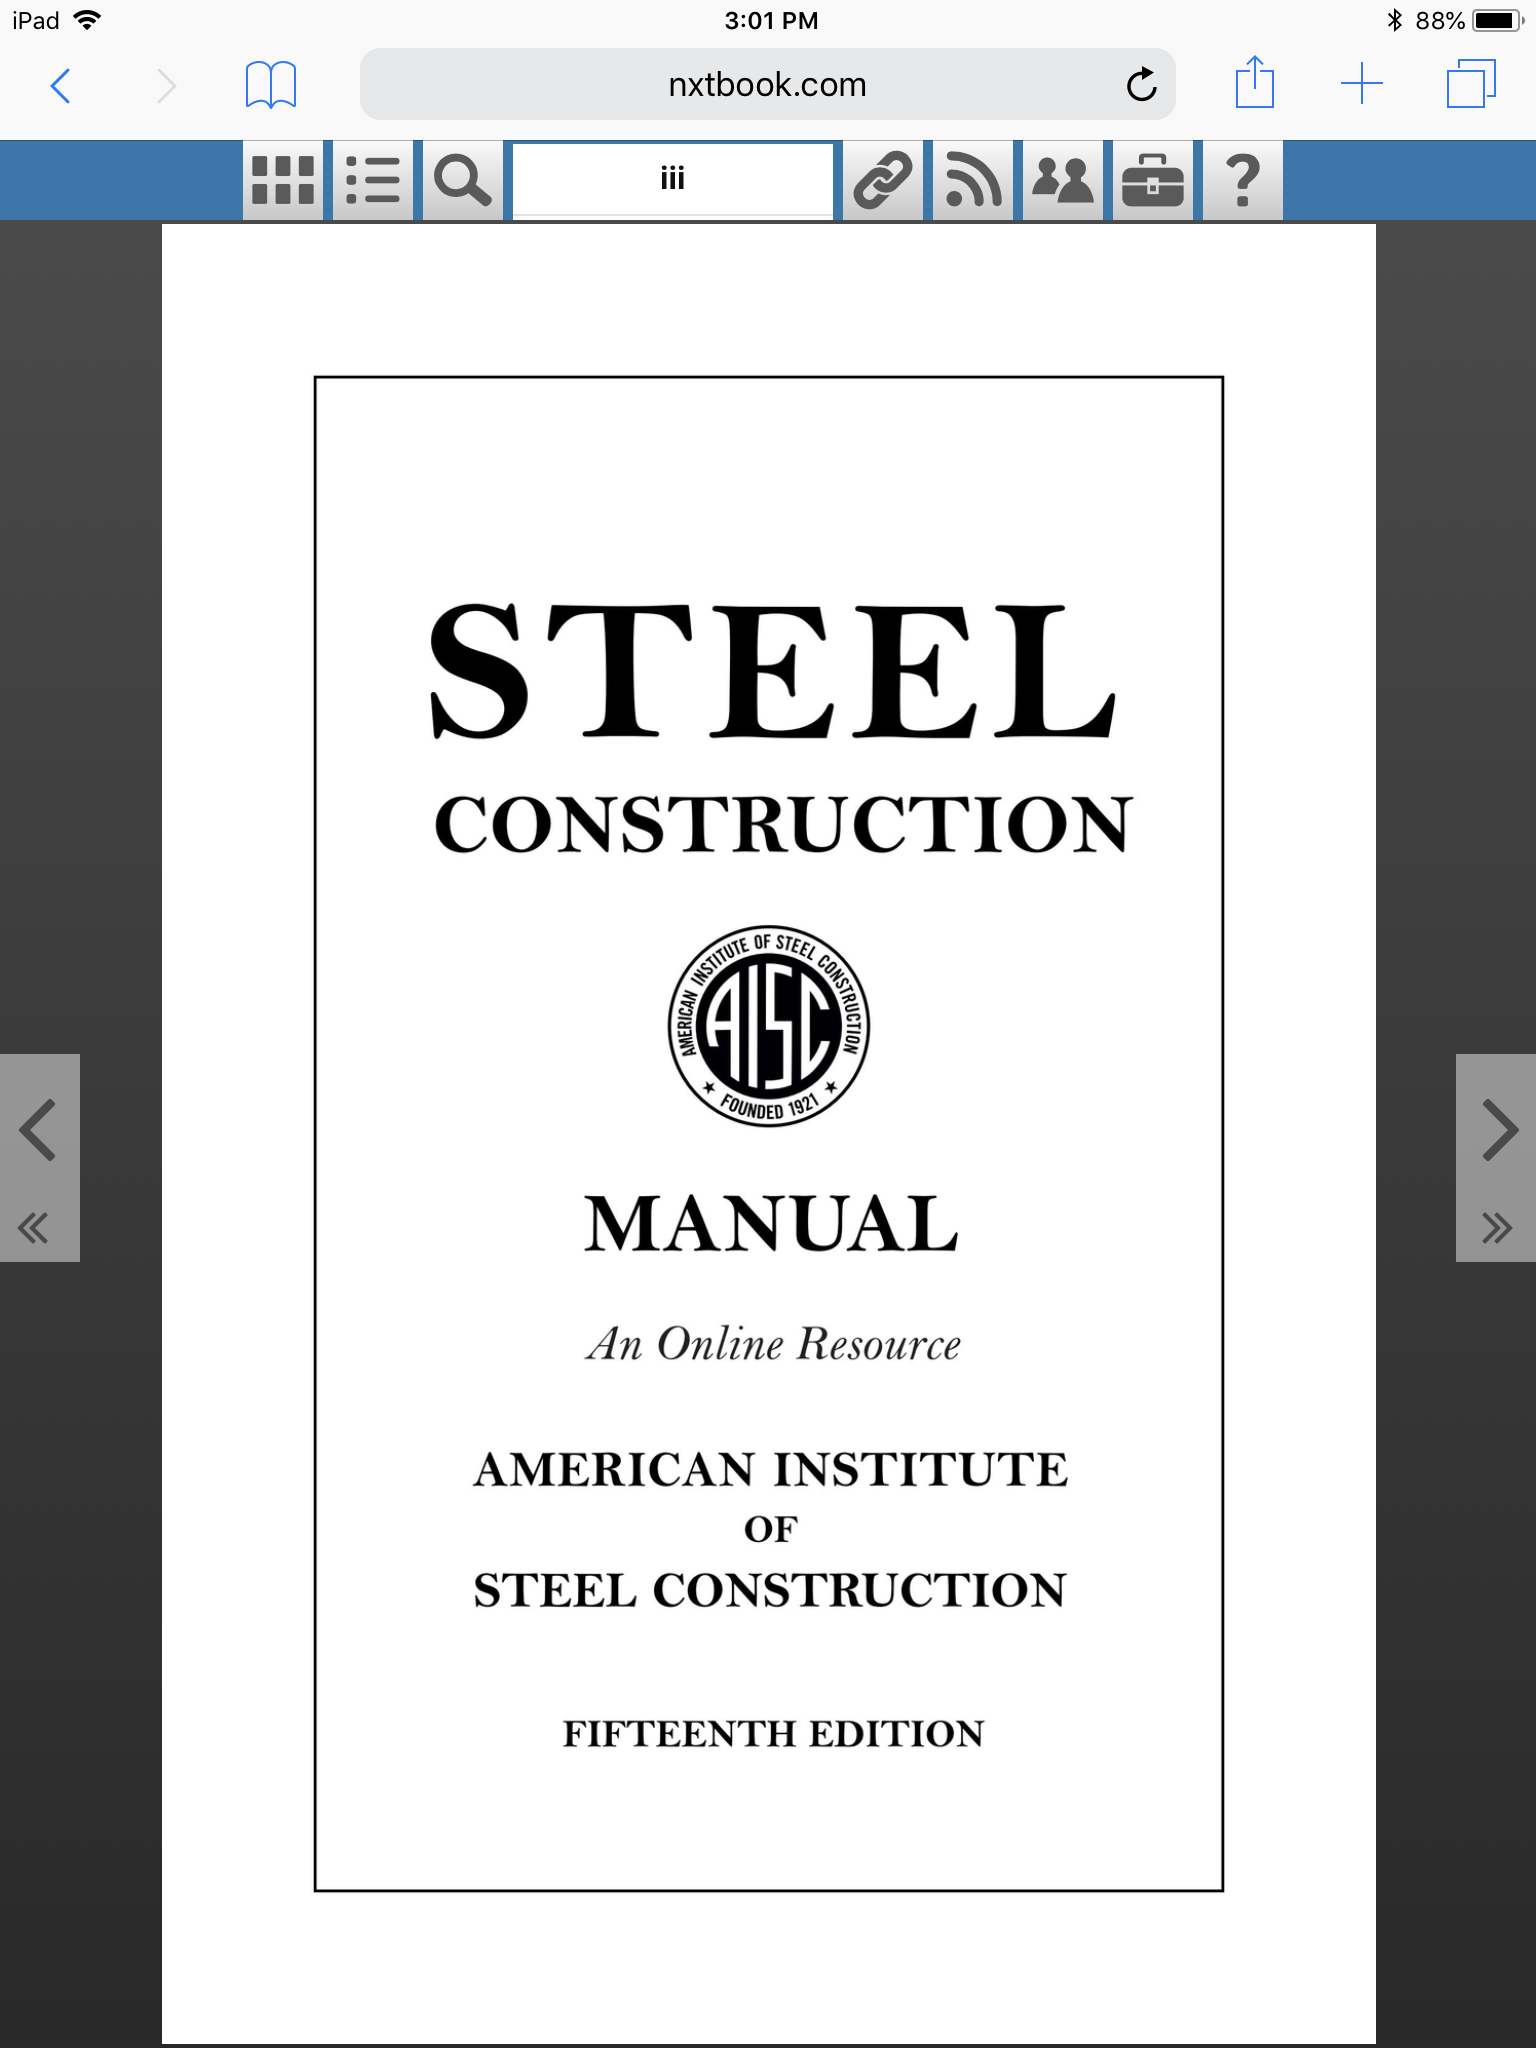 AISC title page from website